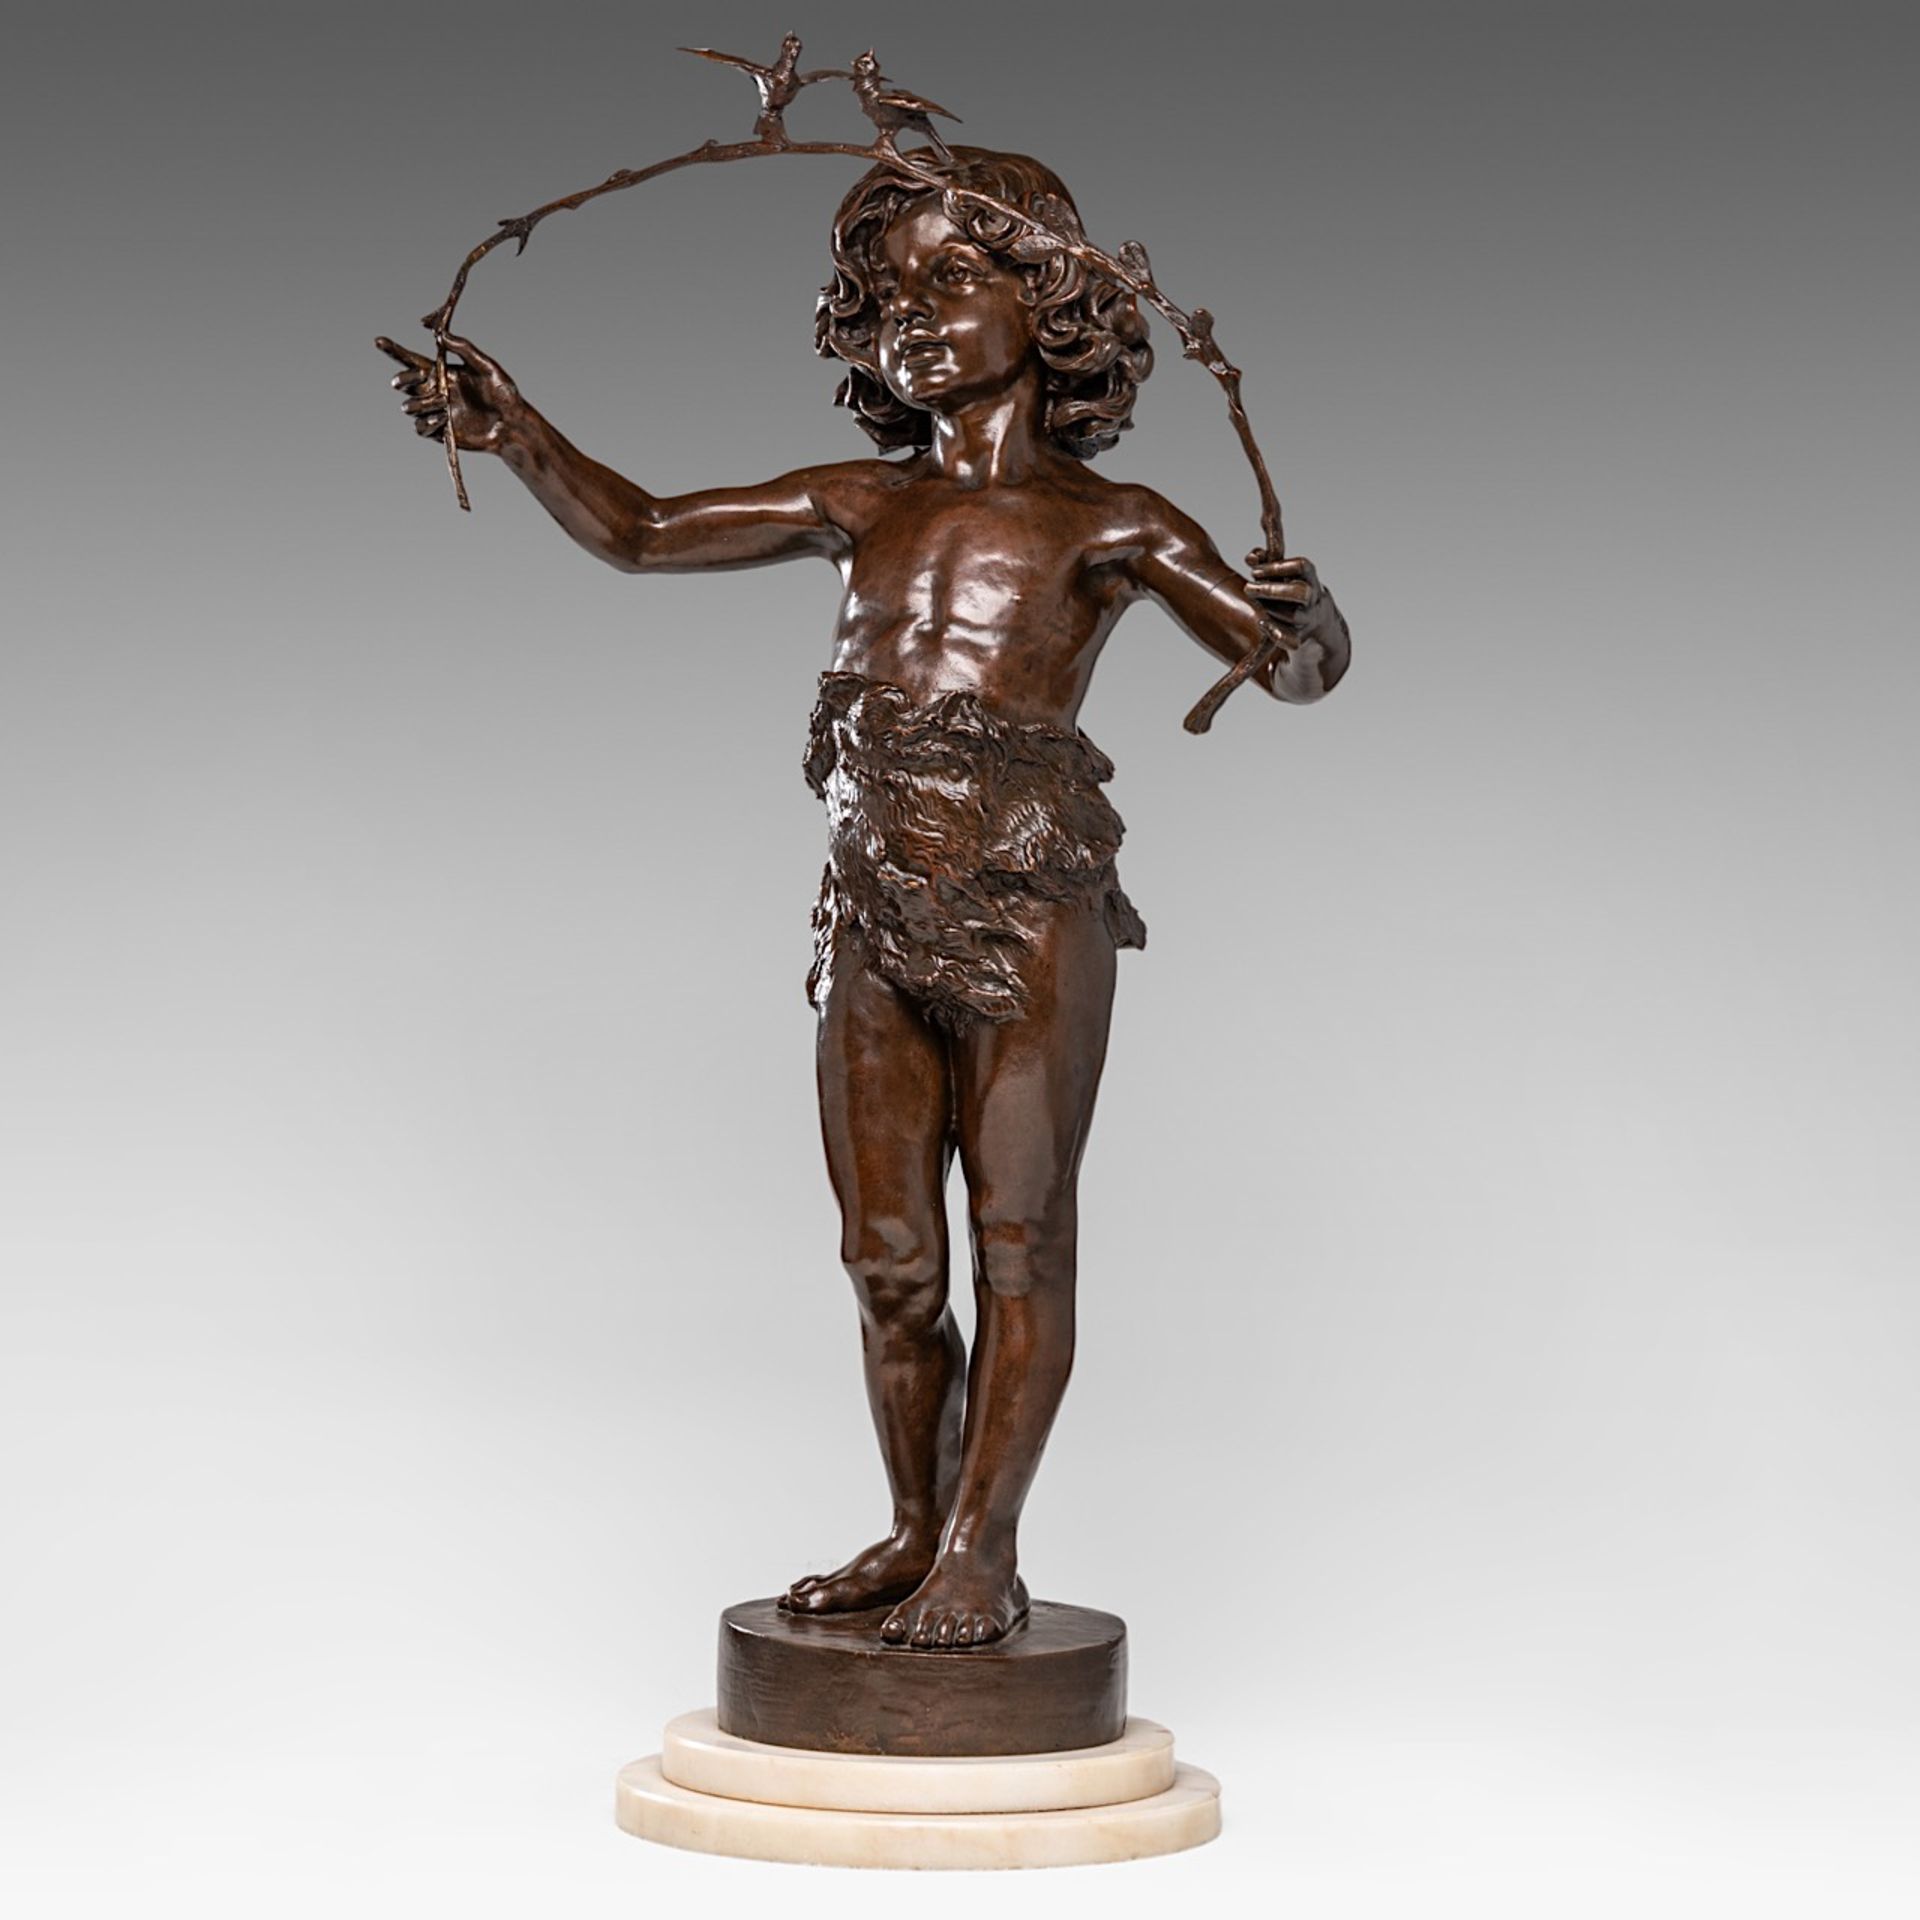 Marcel Debut (1865-1933), boy playing with birds, patinated bronze, H 70 cm